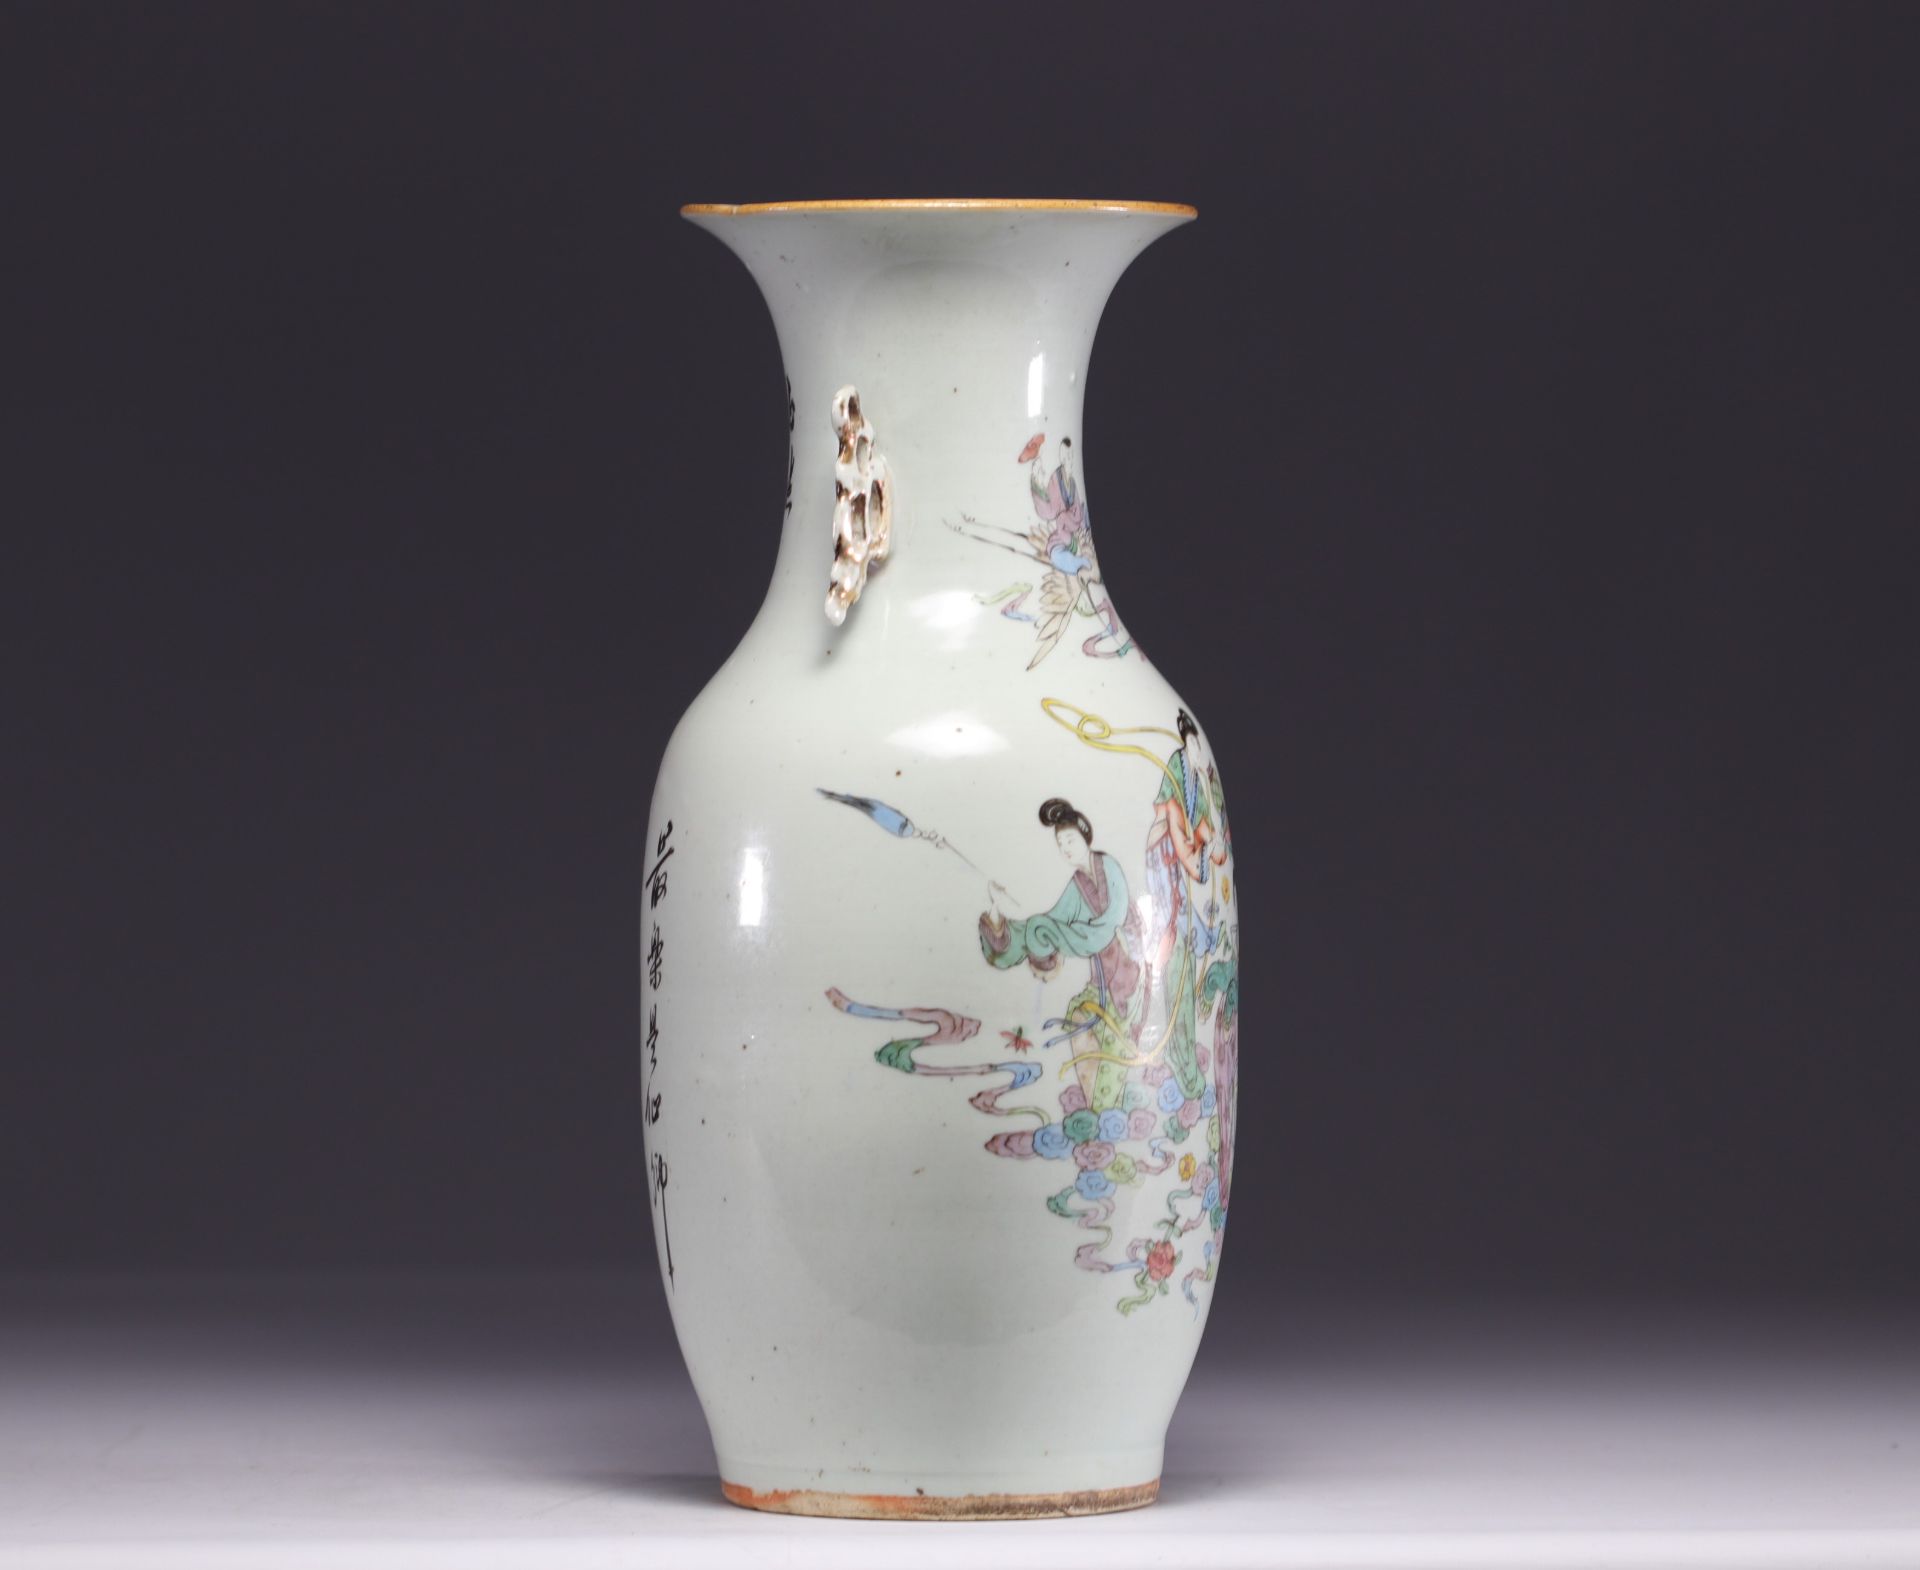 China - Famille rose vase decorated with figures, early 20th century - Image 2 of 5